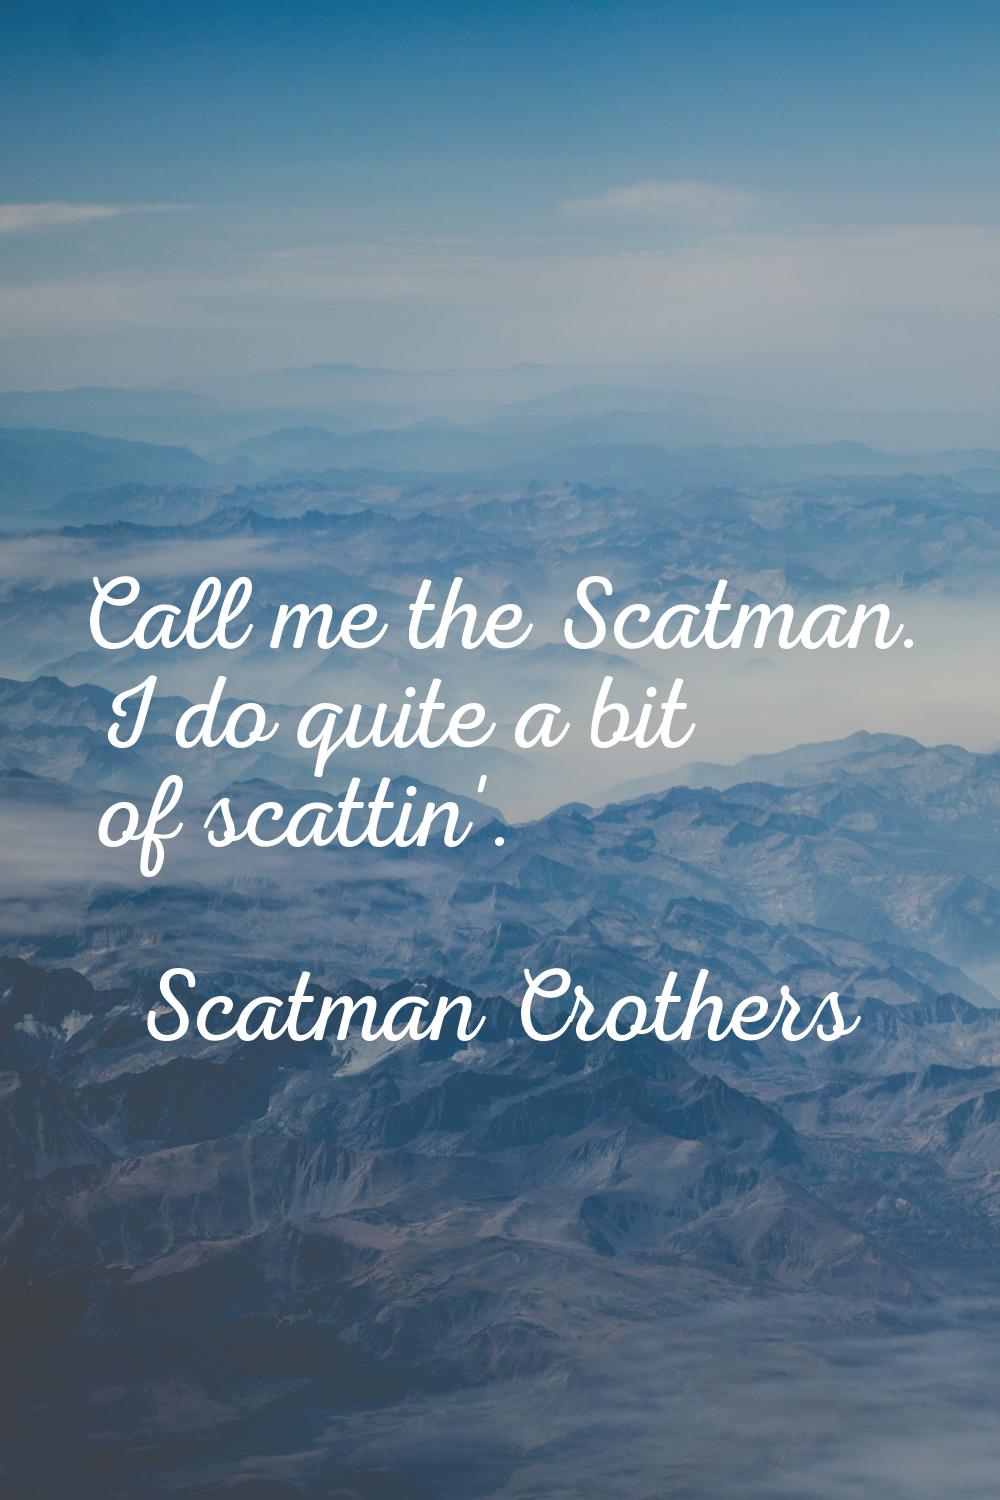 Call me the Scatman. I do quite a bit of scattin'.